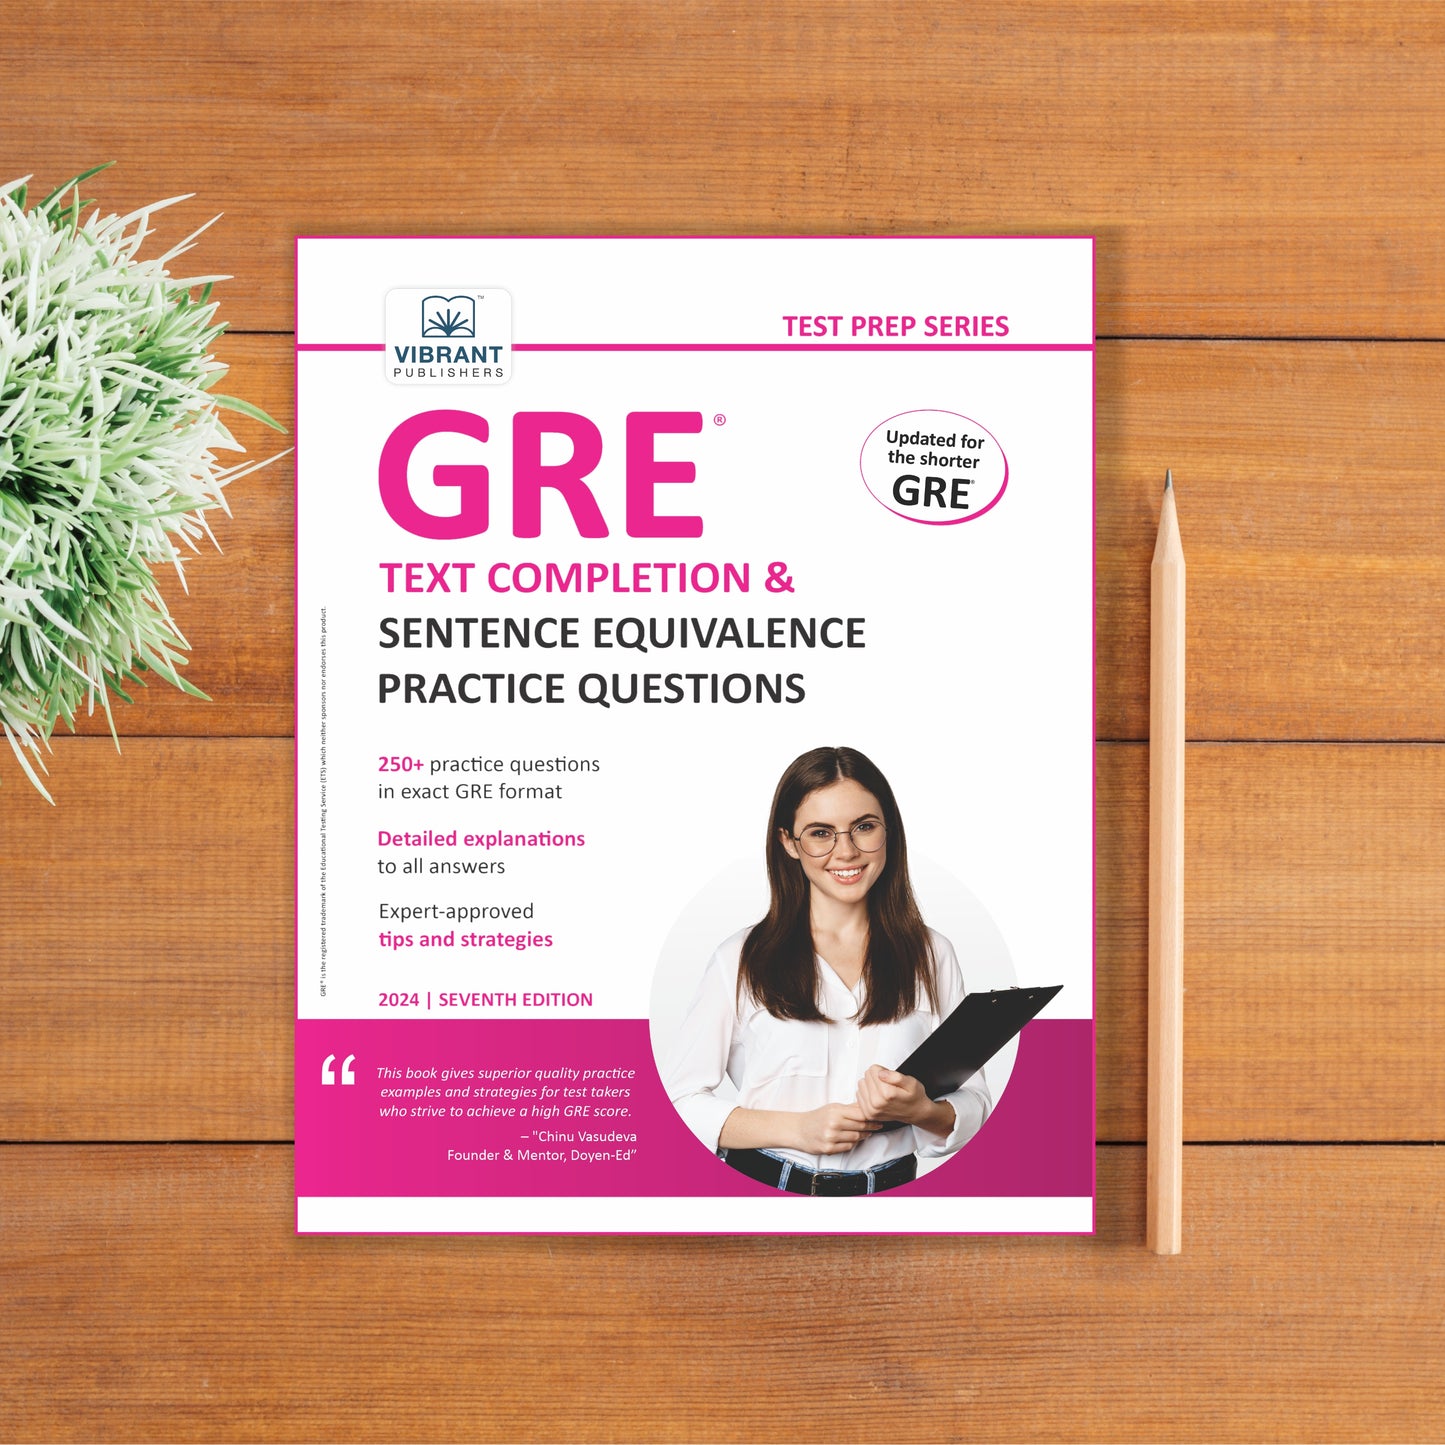 GRE Text Completion and Sentence Equivalence Practice Questions (2024 Edition)